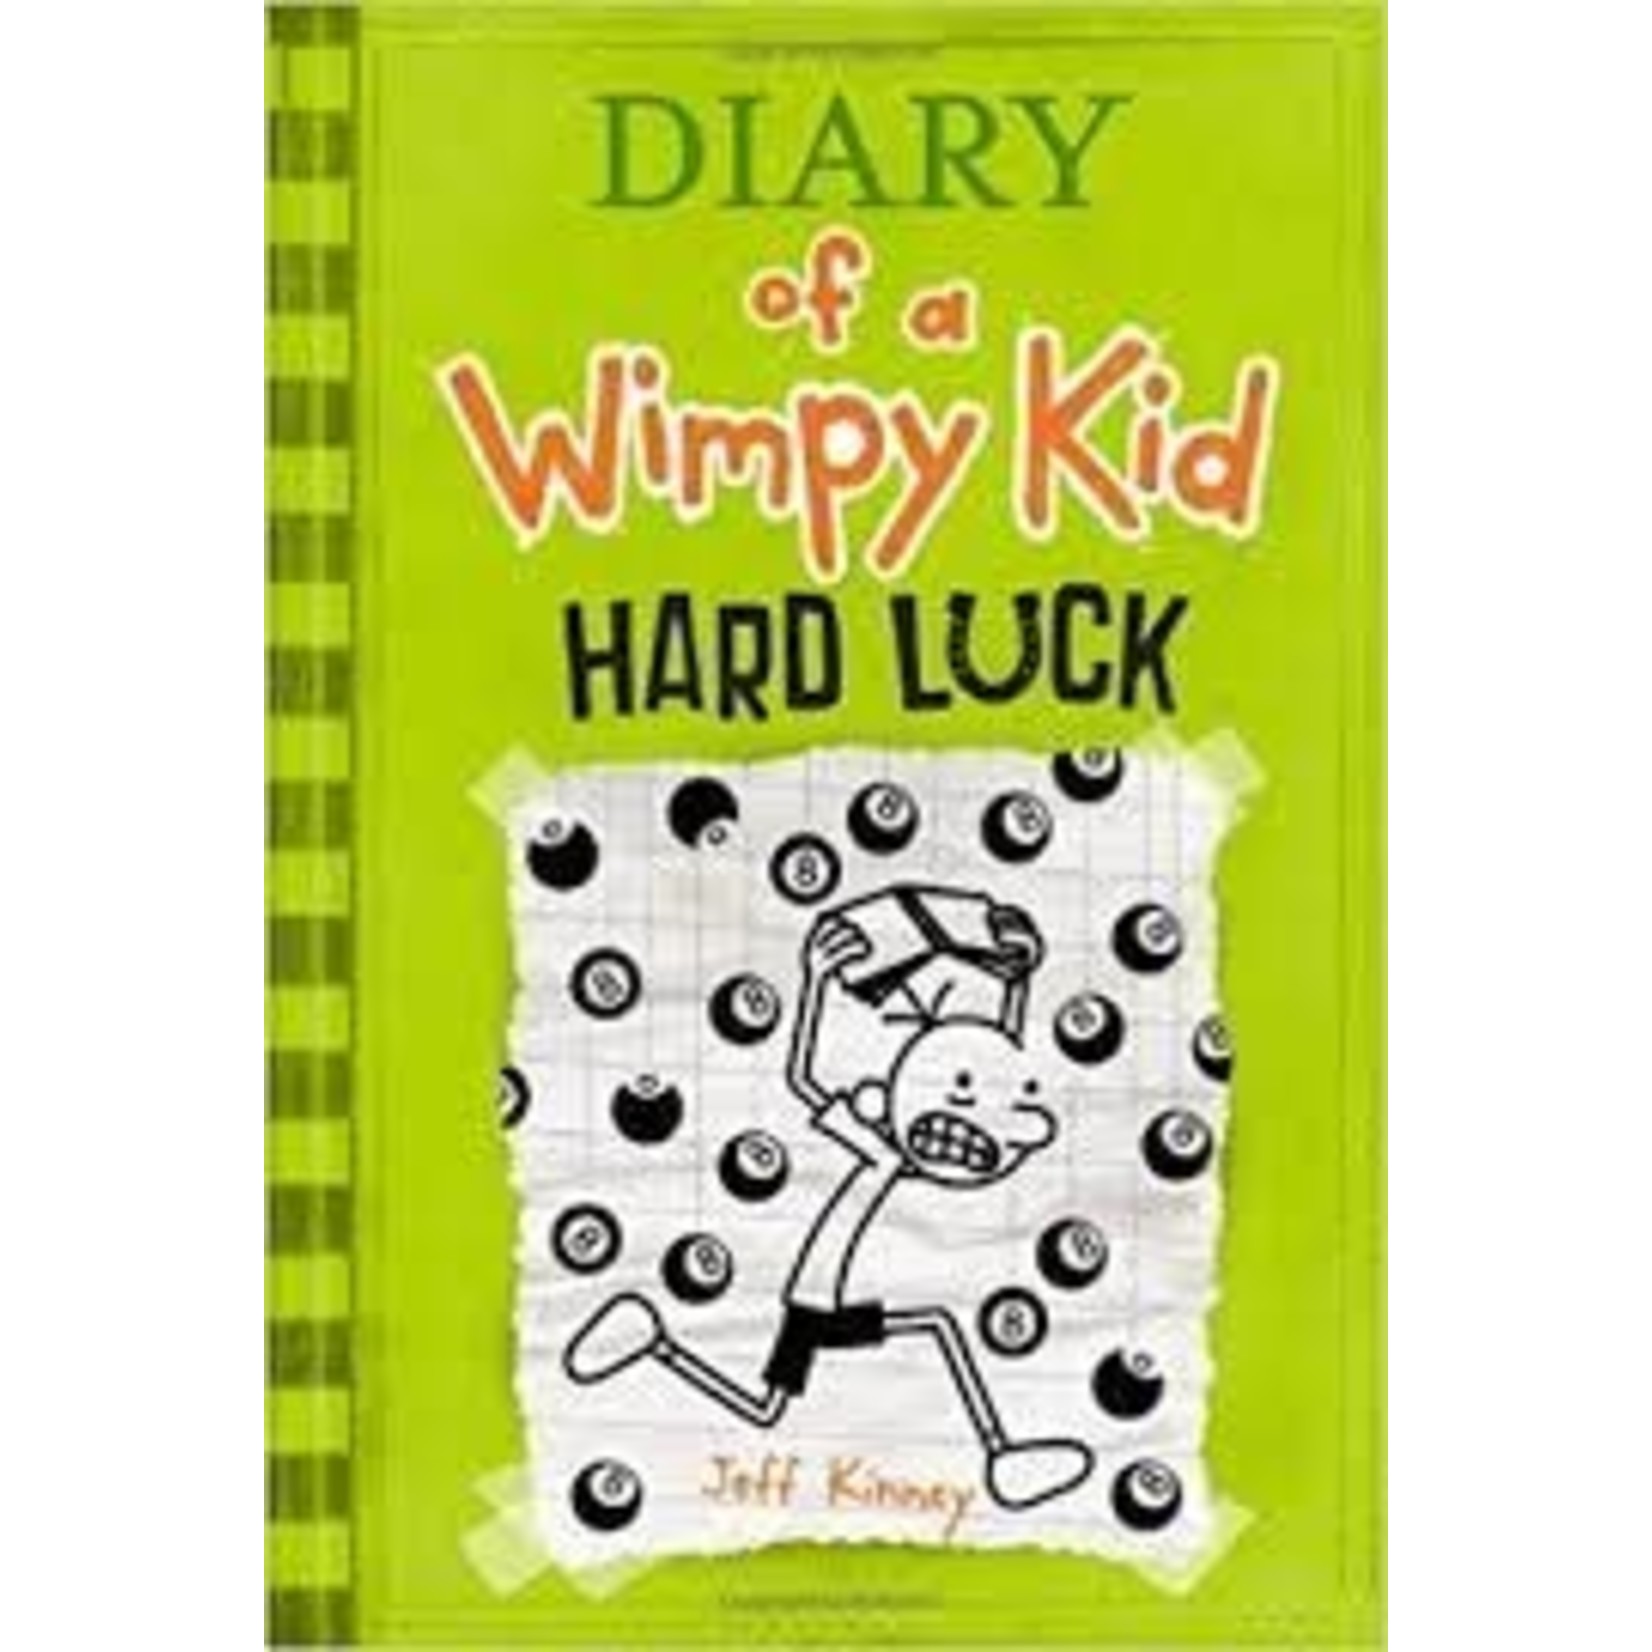 Jeff Kinney Diary of a Wimpy Kid - Hard Luck (Book #8)